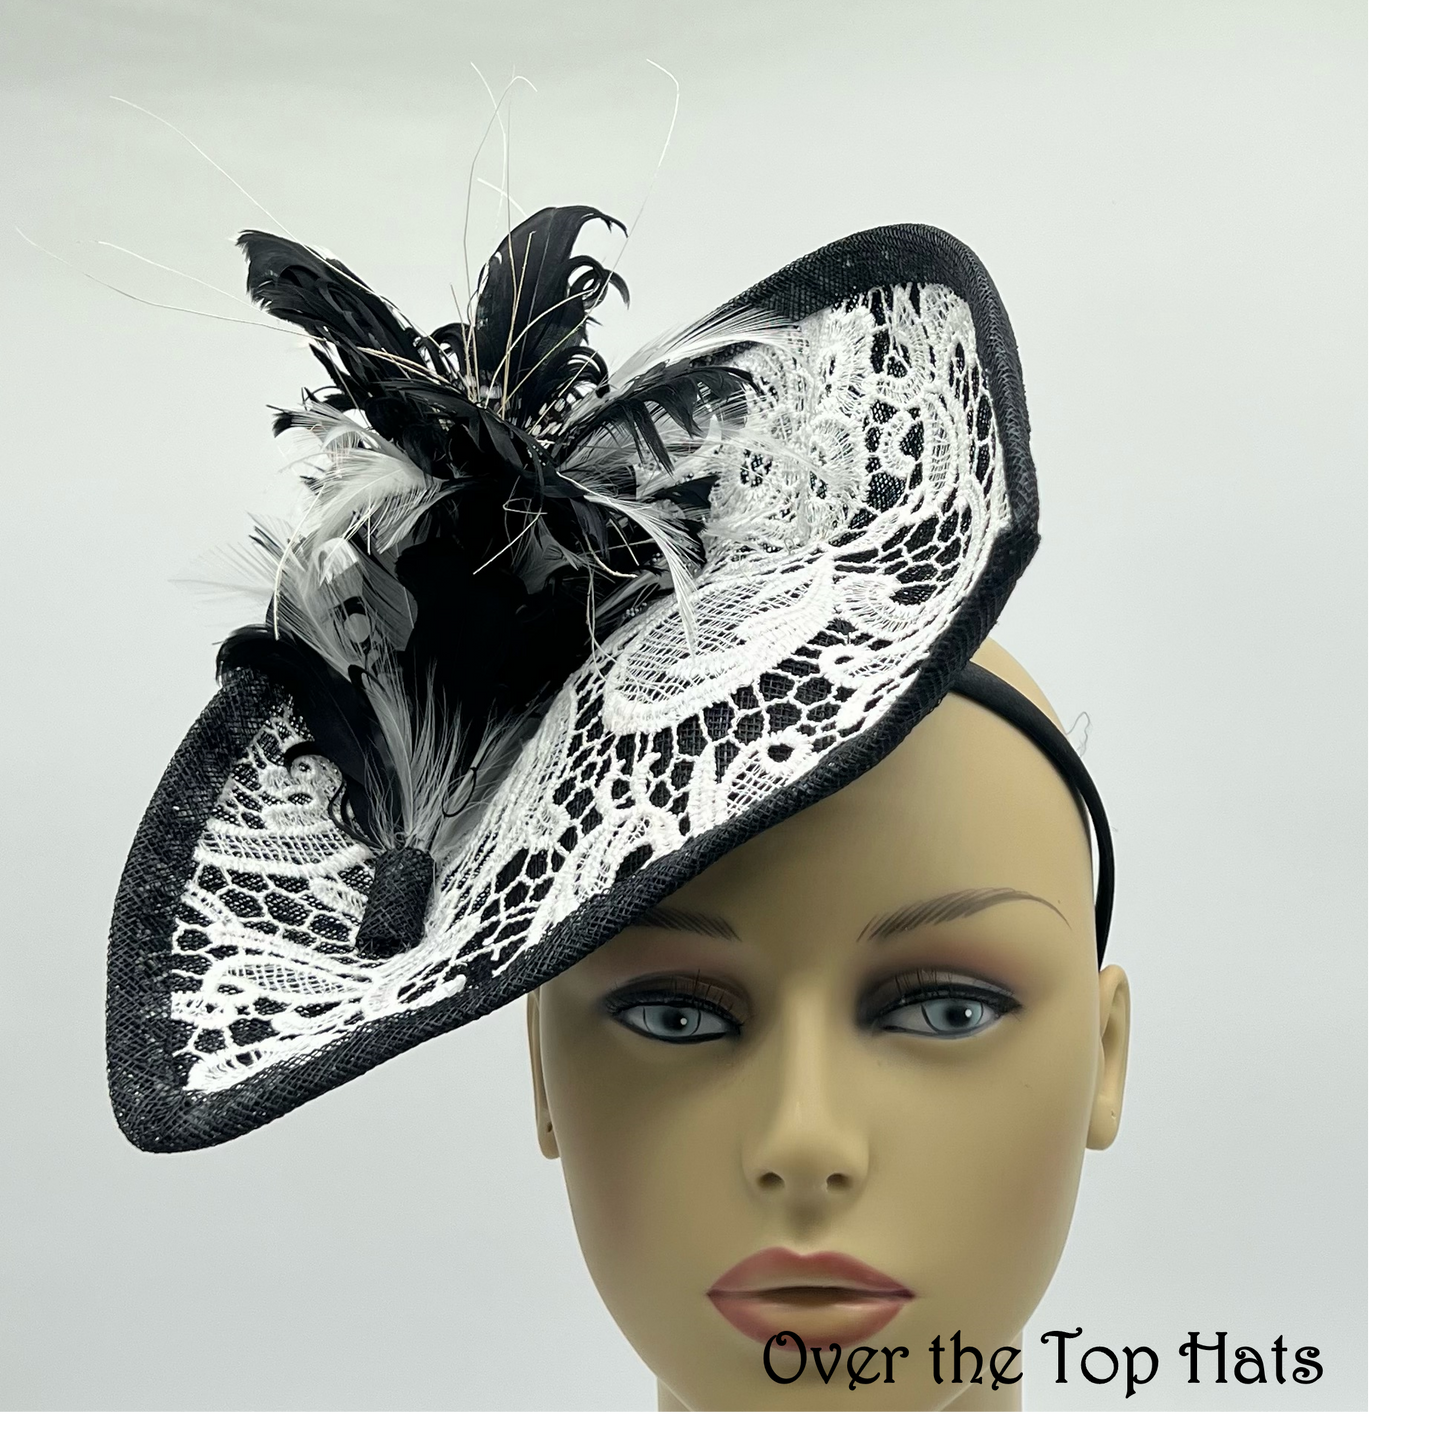 Sinamay and Lace Black and White Saucer, Great for Kentucky Derby, Ascot or Church